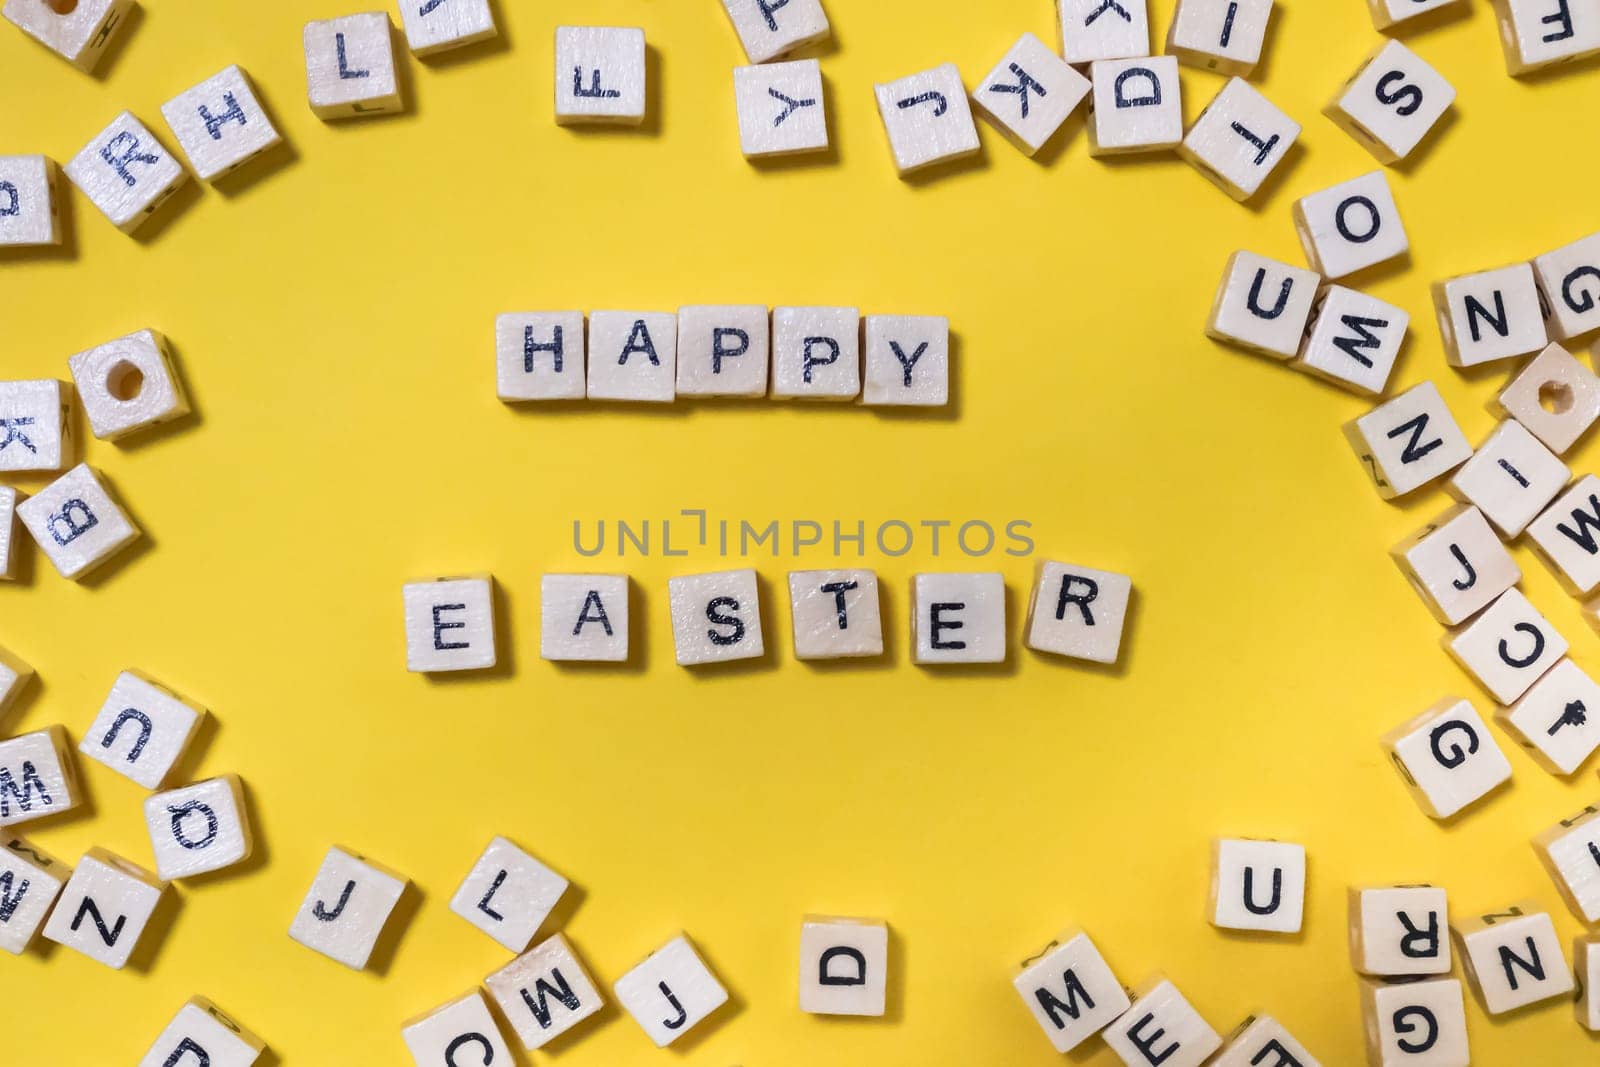  inscription on wooden cubes happy easter on yellow background. creative festive background with scattered letters